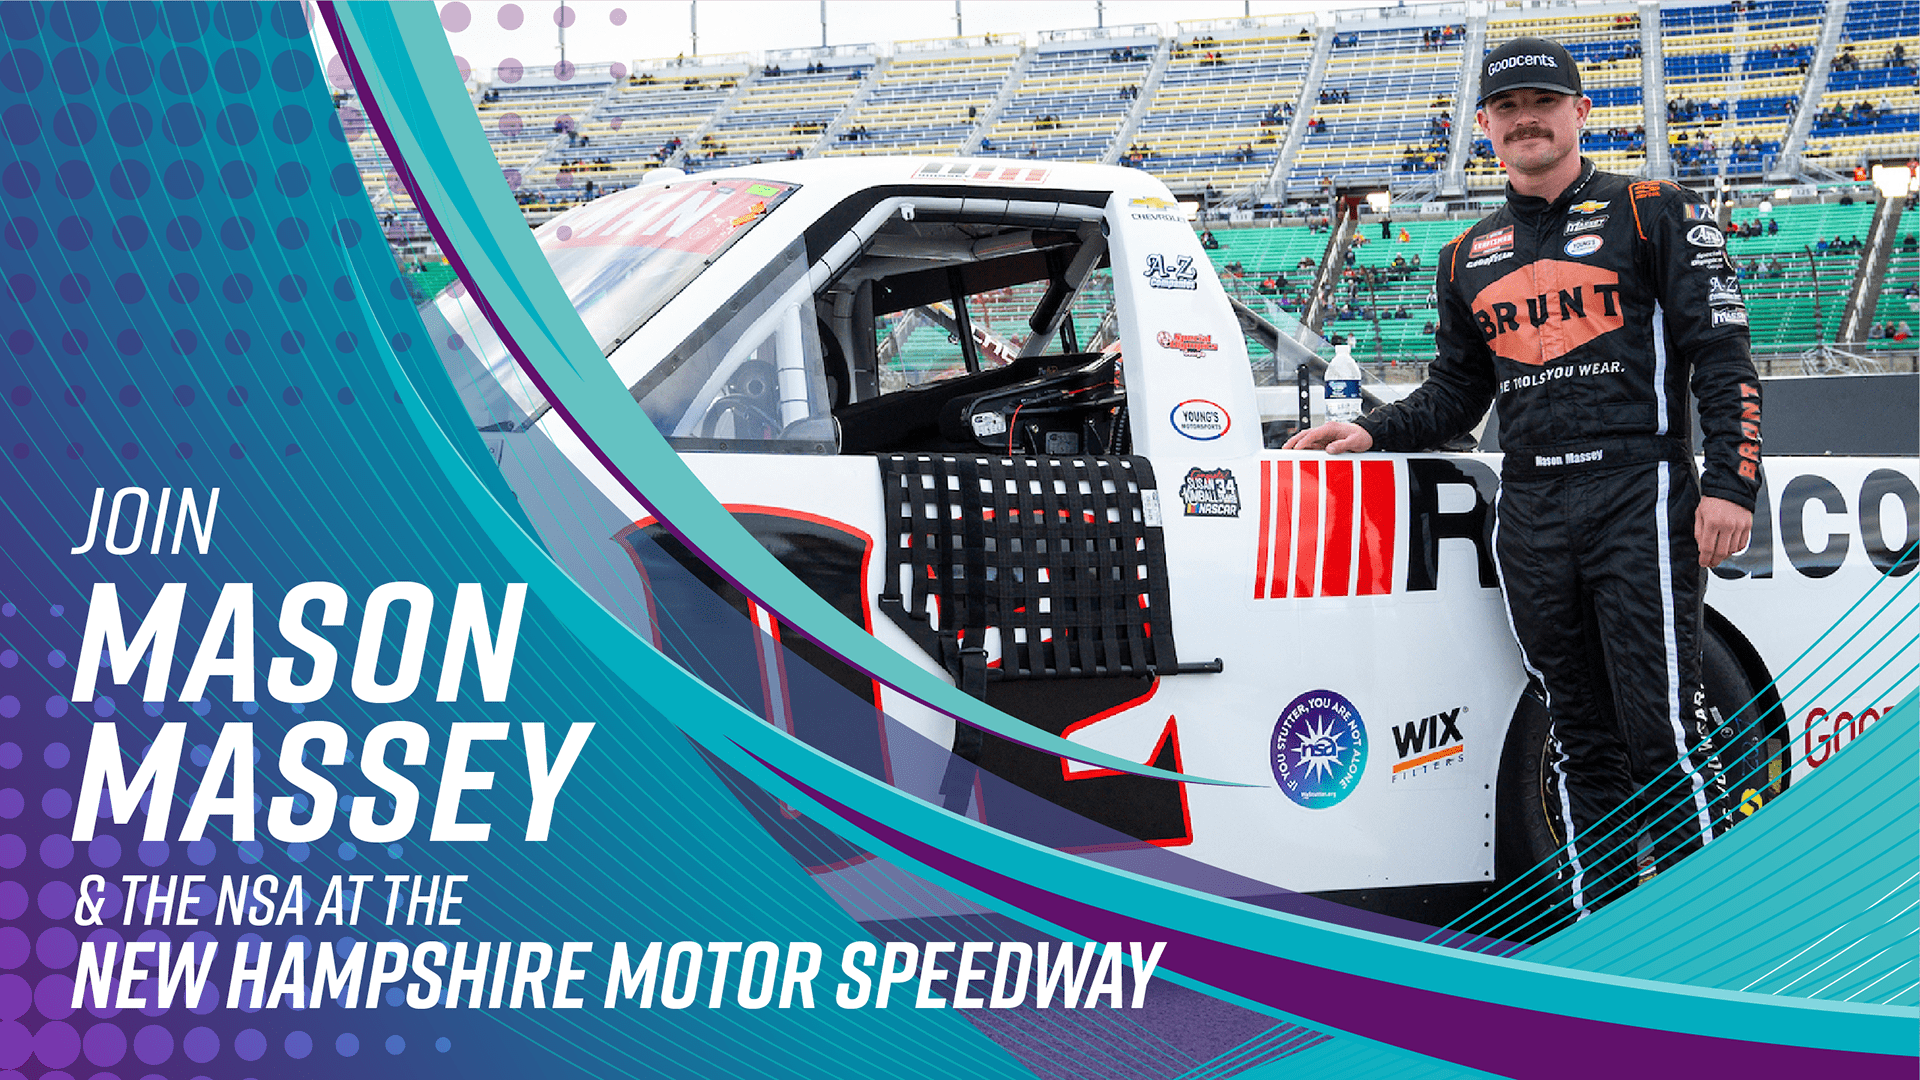 A racing driver stands next to a truck emblazoned with "BRUNT" in bold letters. The image features vibrant graphics and text that reads "Join Mason Massey & the NSA at the New Hampshire Motor Speedway.